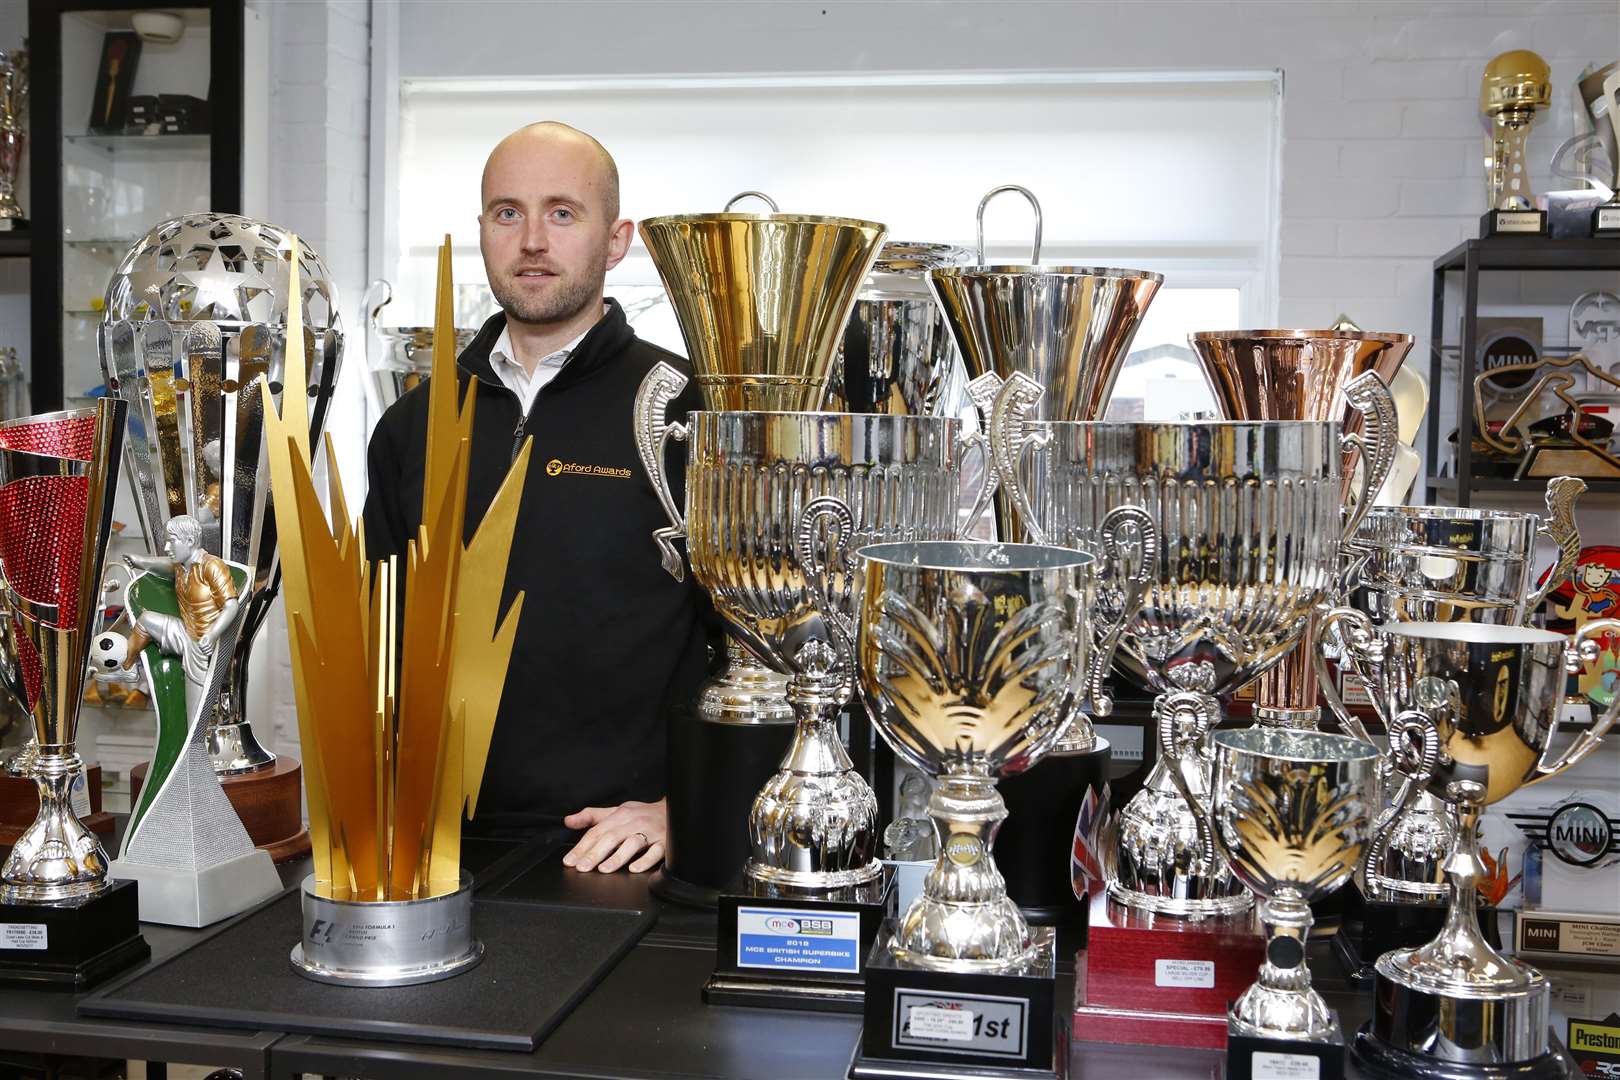 Jon Ford from Aford Awards, with one of the Formula 1 British Grand Prix trophies they have made in recent years